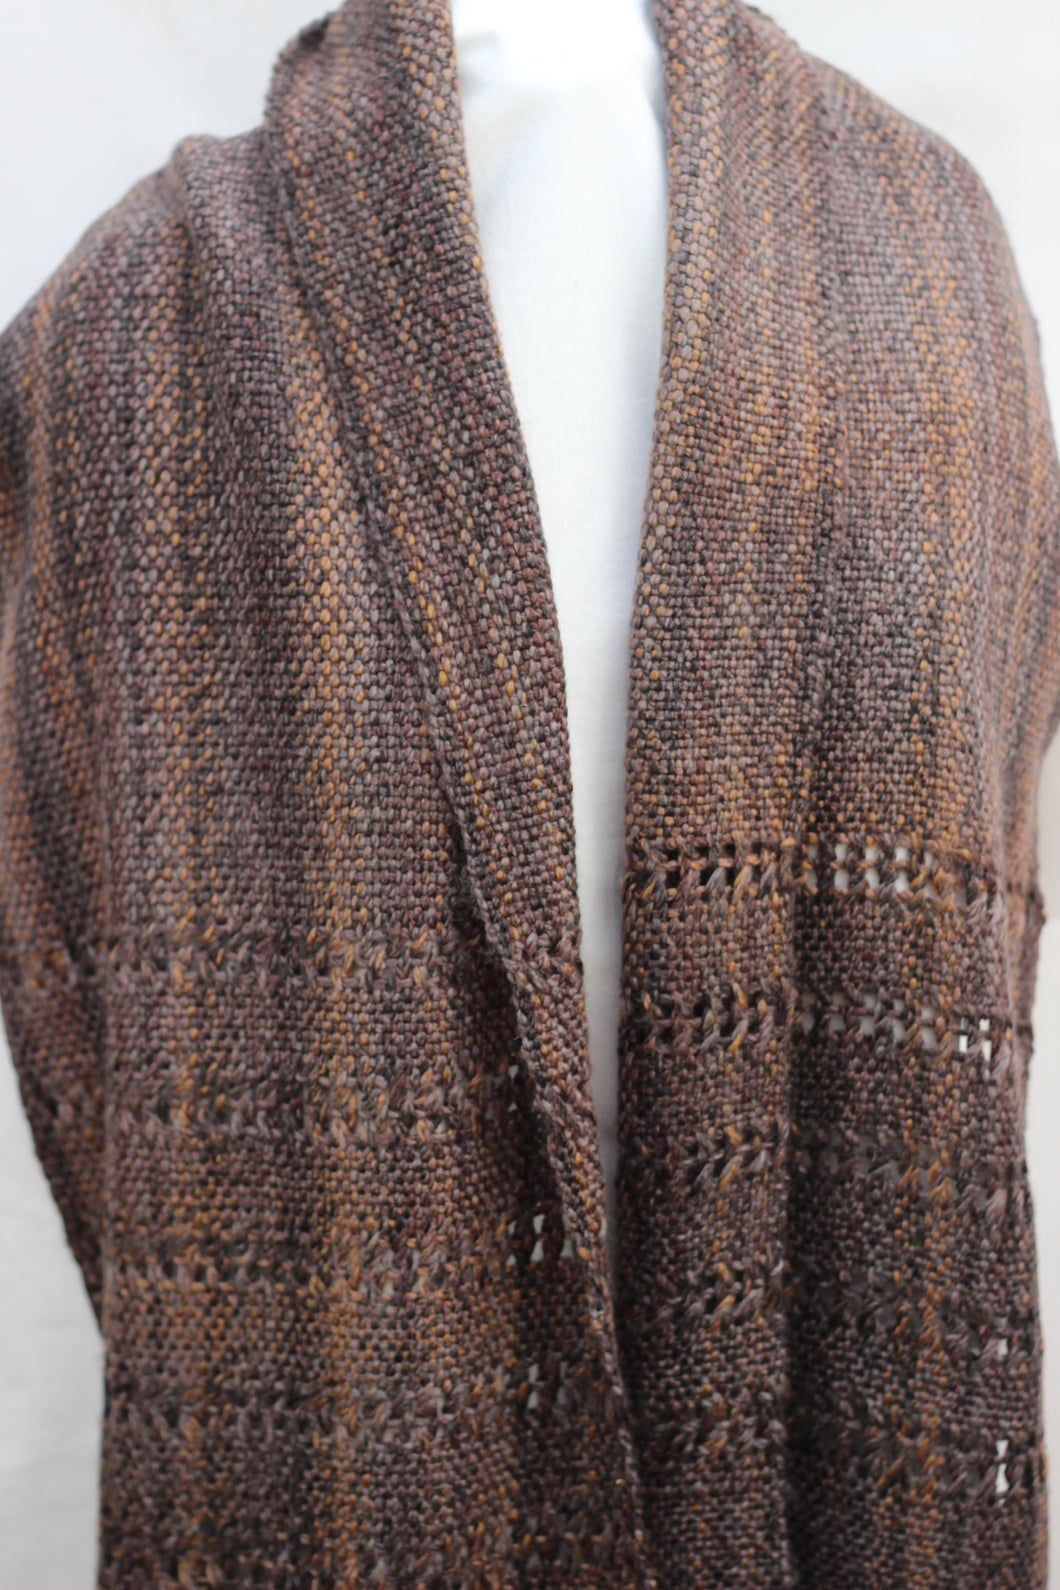 Wrap / wide scarf brown tones with leno lace patterns